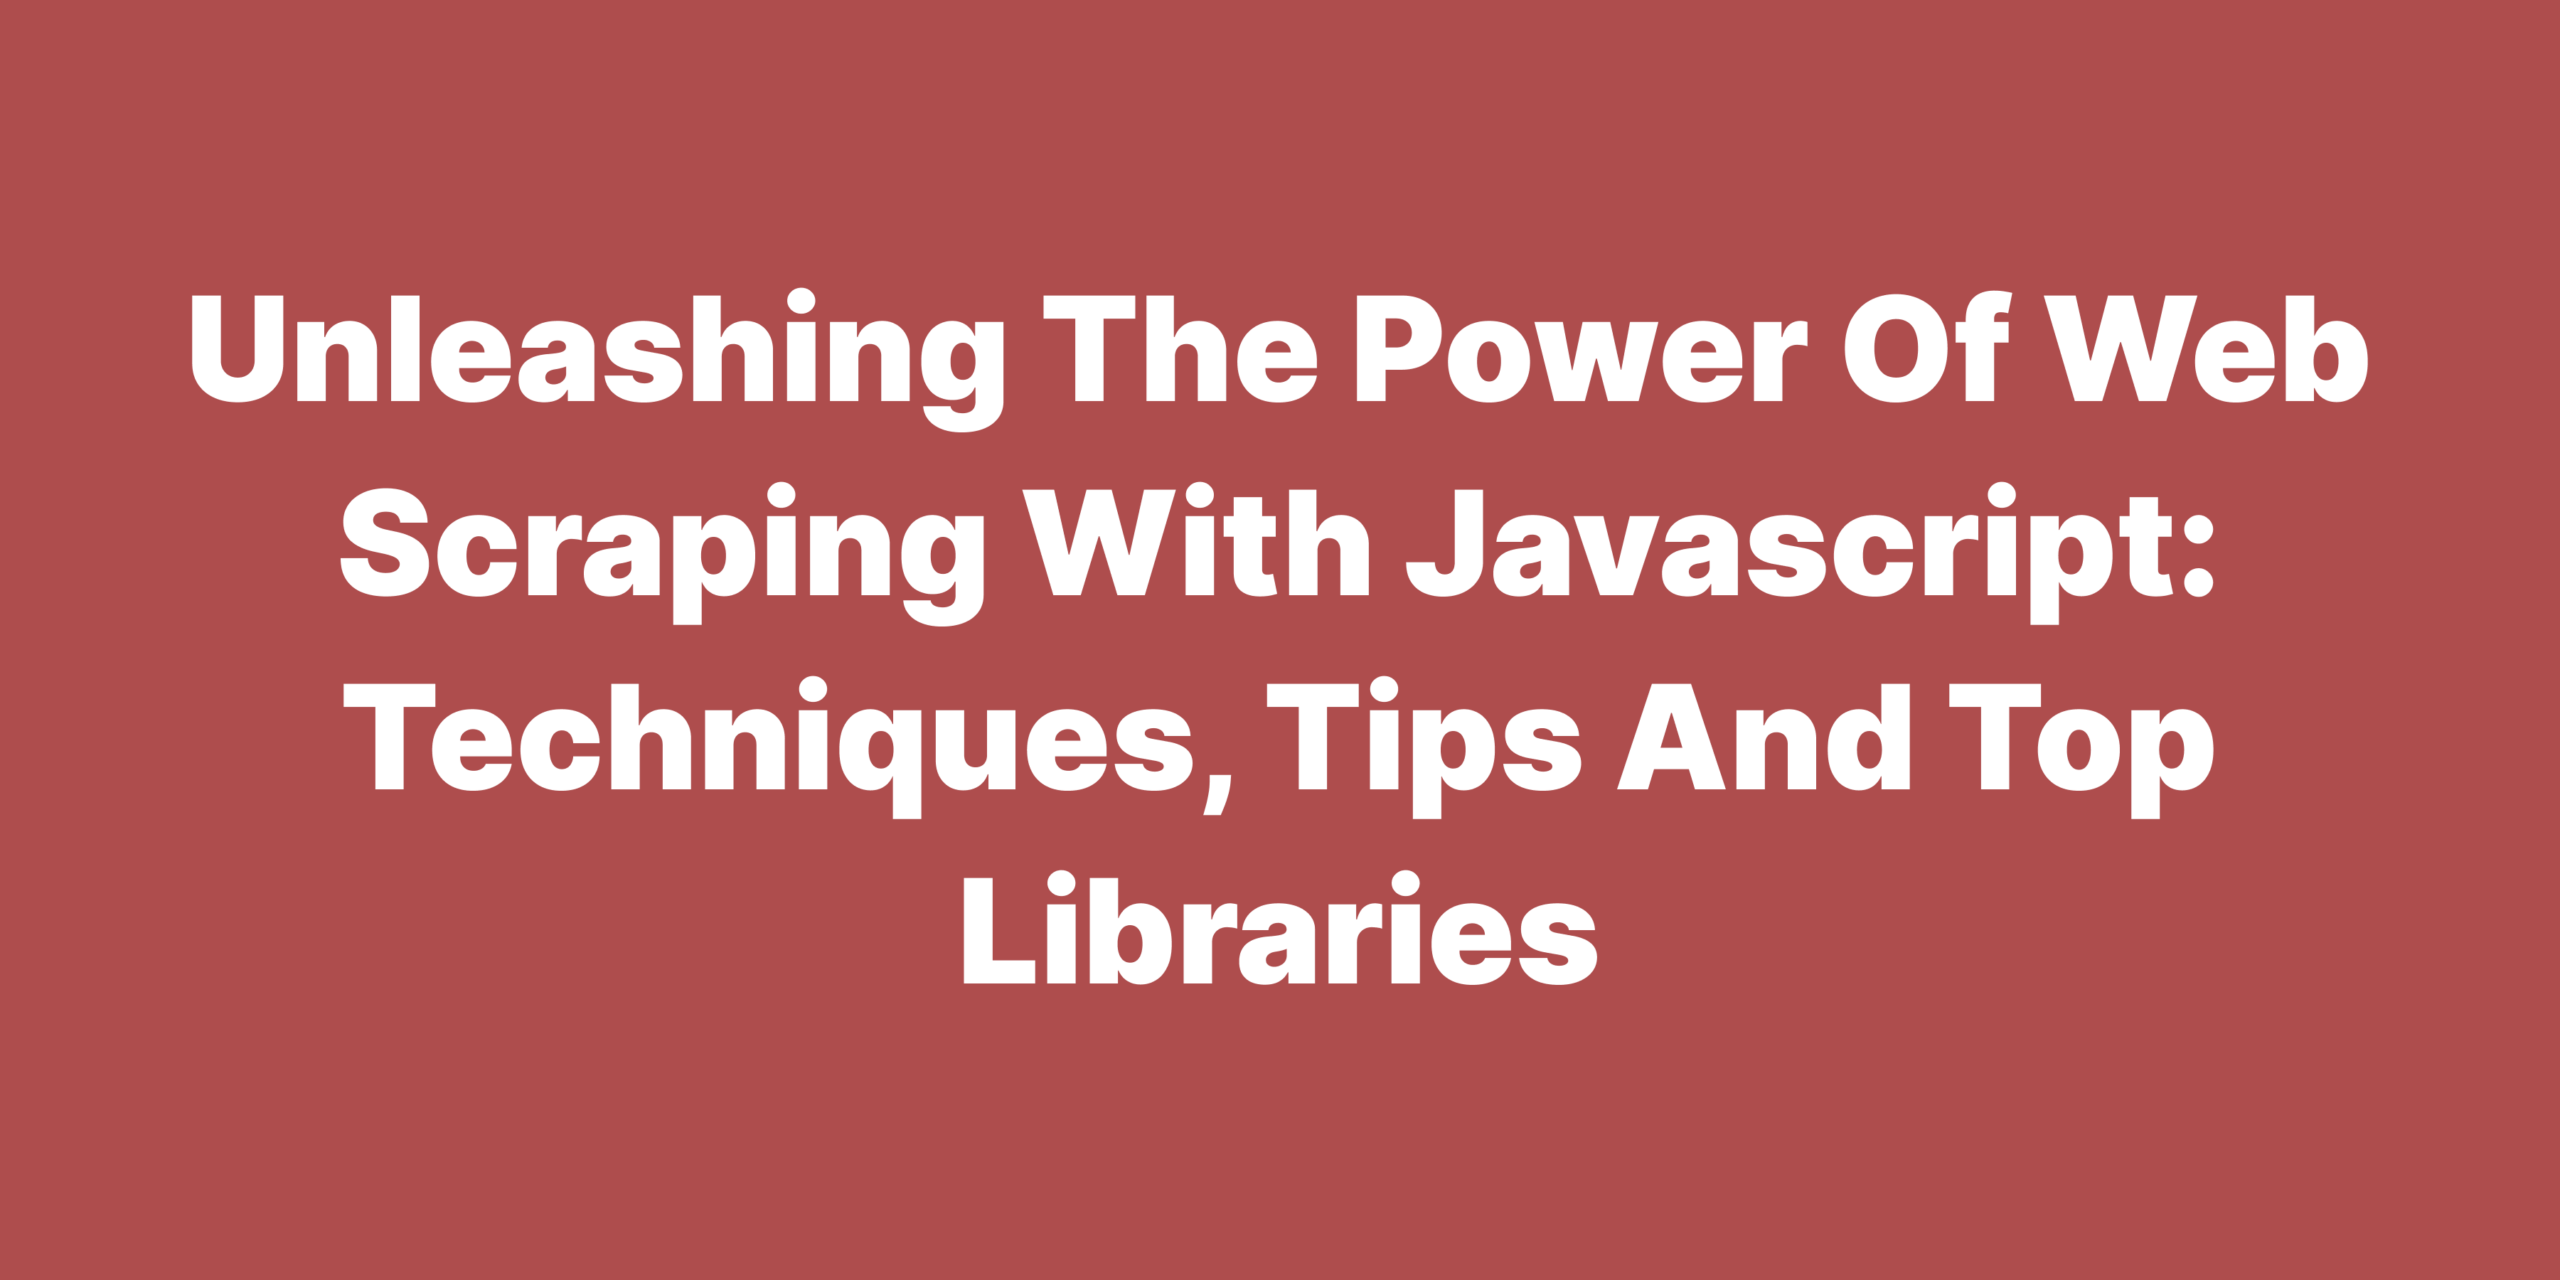 Unleashing the power of web scraping with javascript Techniques Tips and Top Libraries